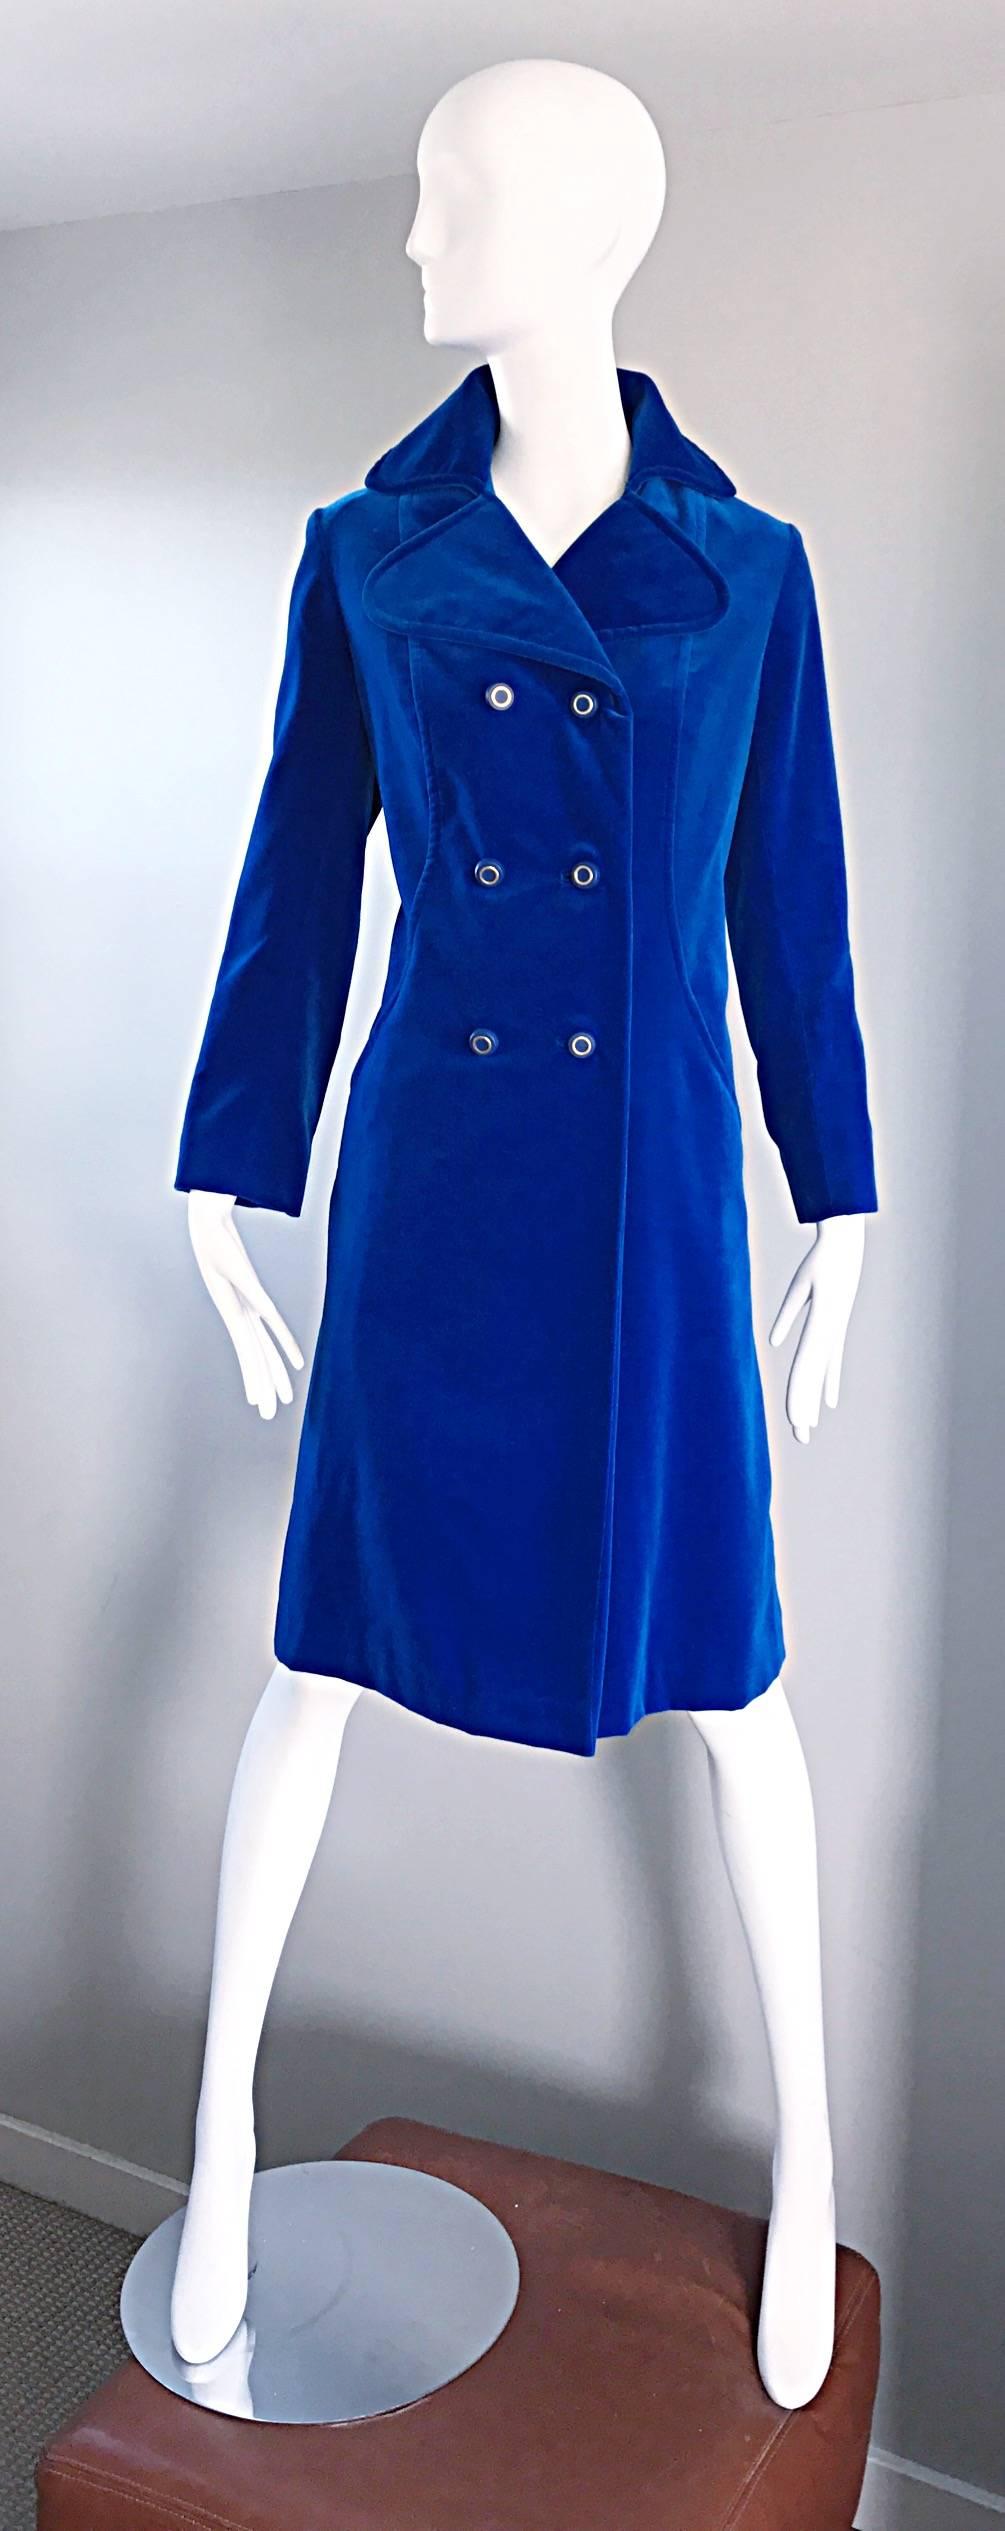 Stunning 60s SURREY CLASSICS royal cerulean blue velvet double breasted jacket! Mod style, with so much comfort. Oversized signature 1960s rounded collar. Blue buttons up the front. Pockets at each side of the waist. 100% cotton velvet. Fully lined.